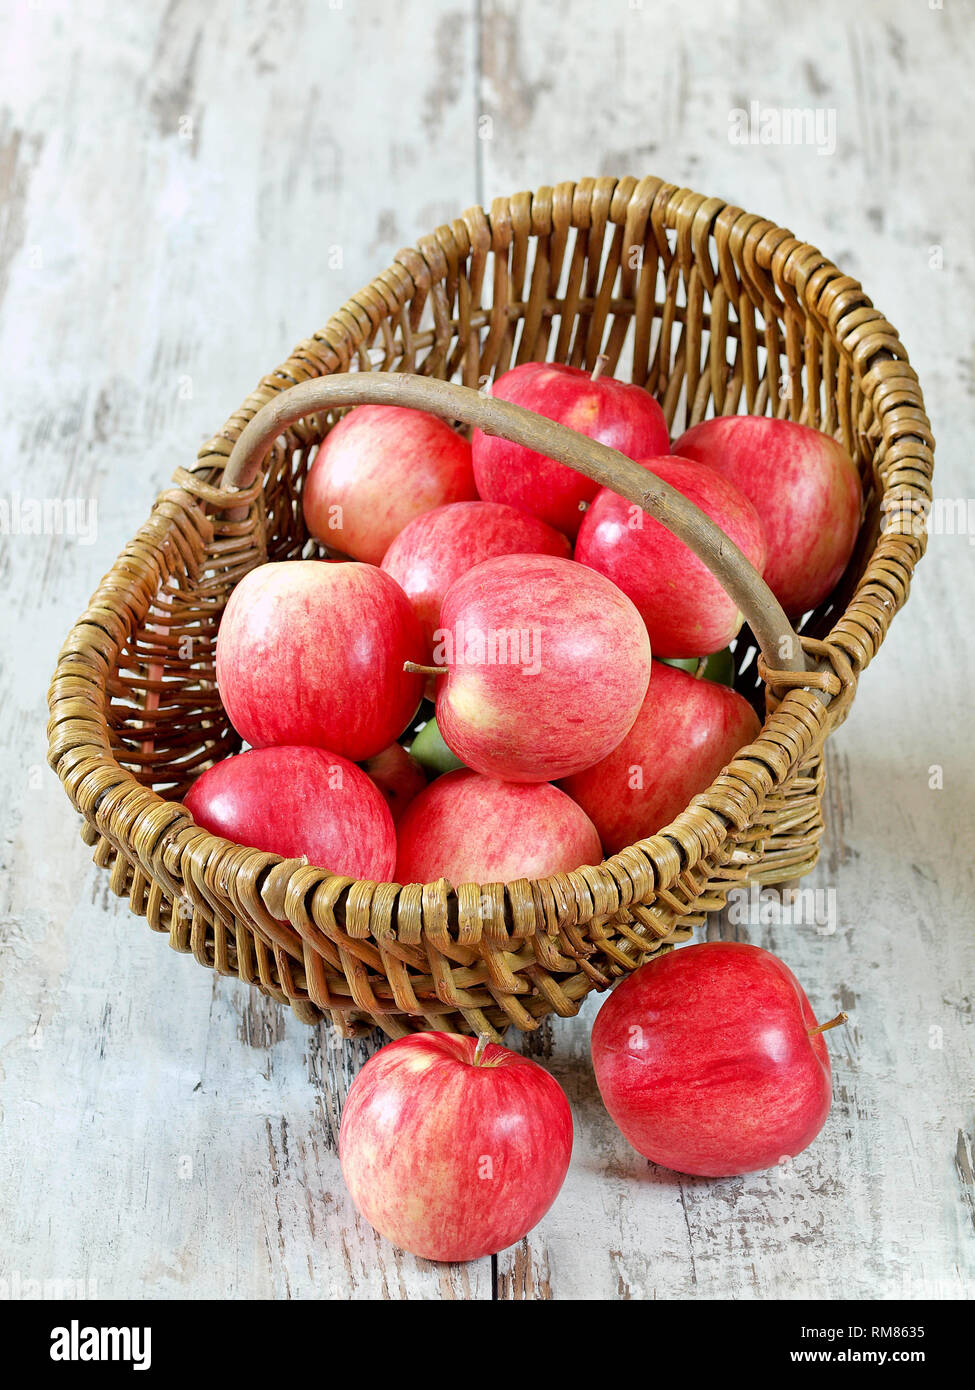 Delicious fresh apple - juicy red apples Stock Photo